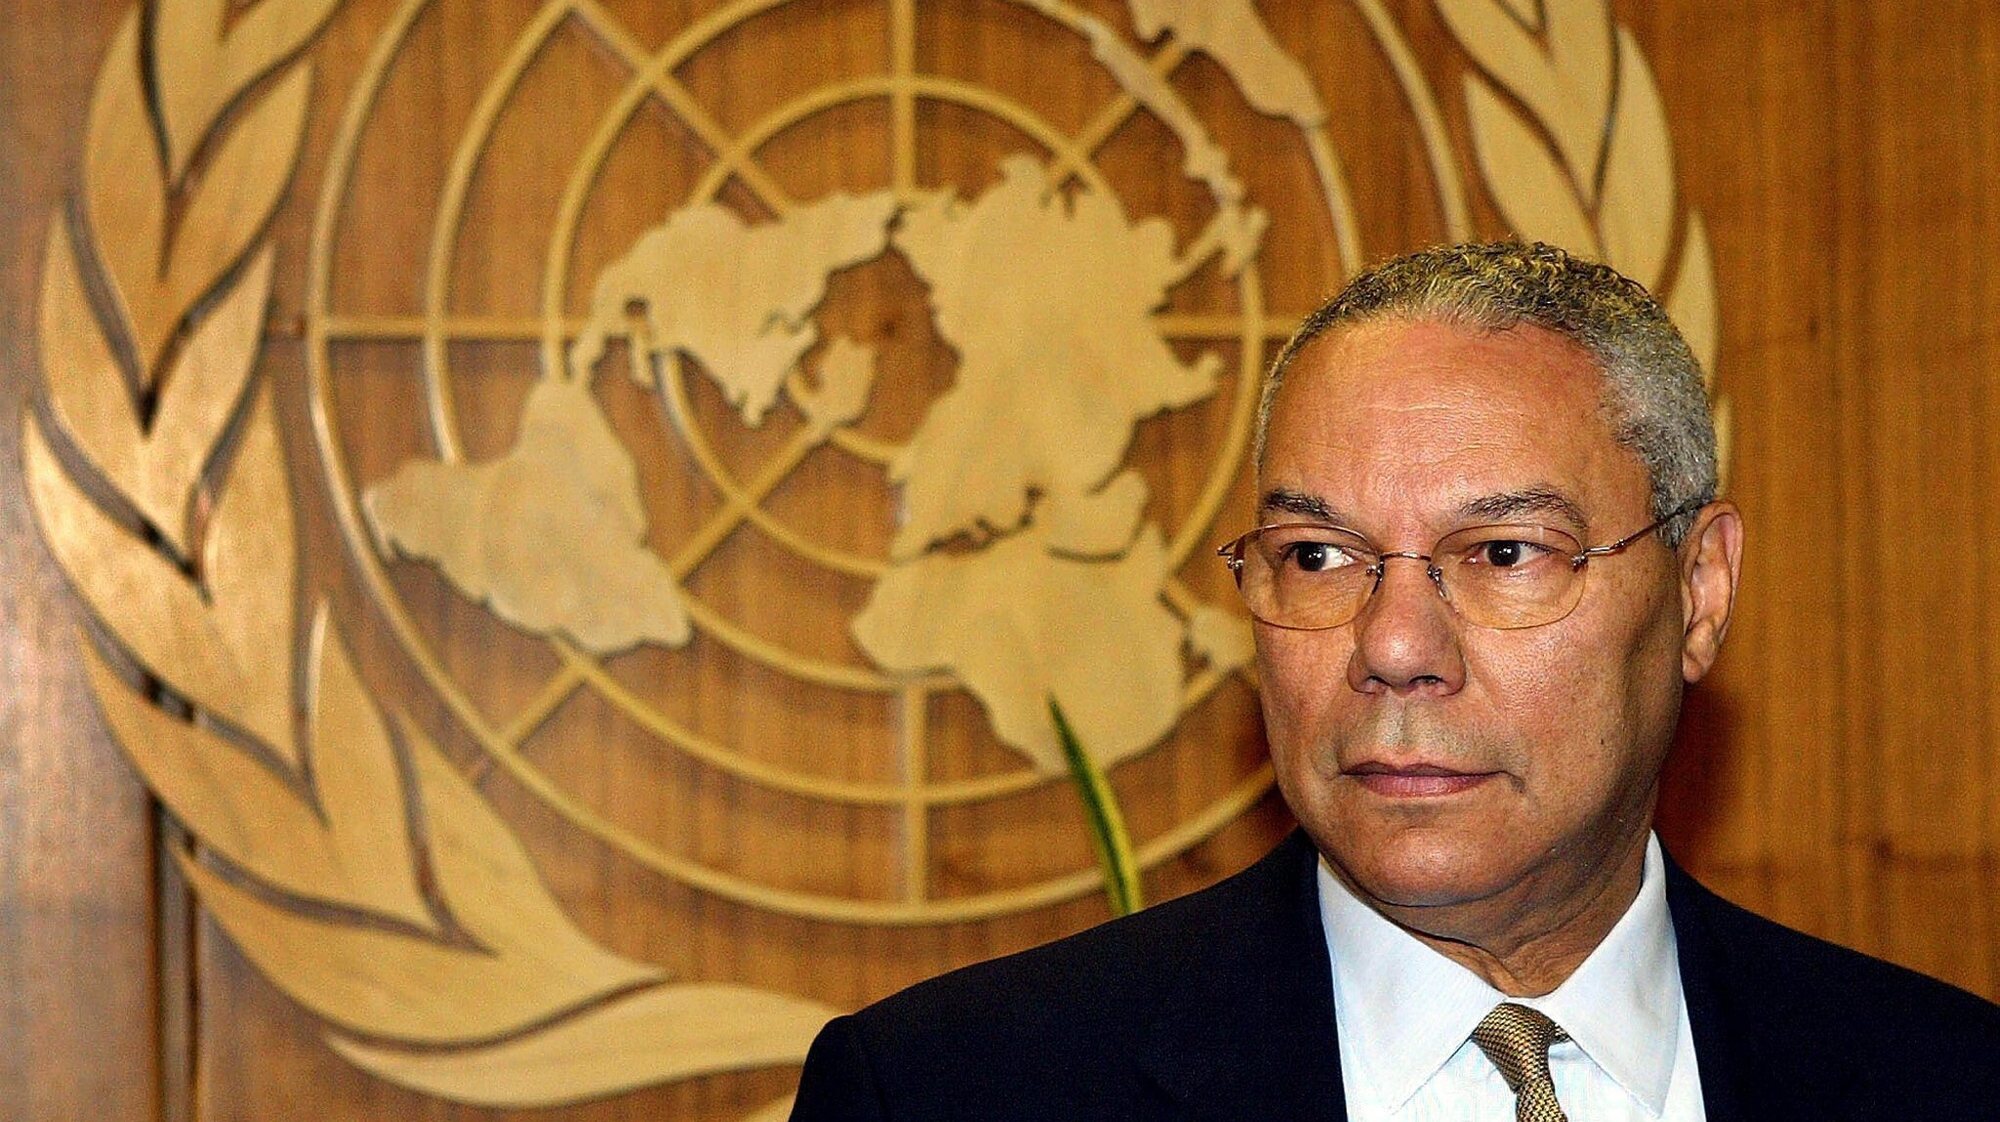 epa09530044 (FILE) - US Secretary of State Colin Powell waits for United Nations Secretary General Kofi Annan outside Annan&#039;s office, at the UN Headquarters in New York City, USA, 21 August 2003 (reissued 18 October 2021). Colin Powell has died at the age of 84, his family said on Facebook on 18 October 2021.  EPA/MATT CAMPBELL